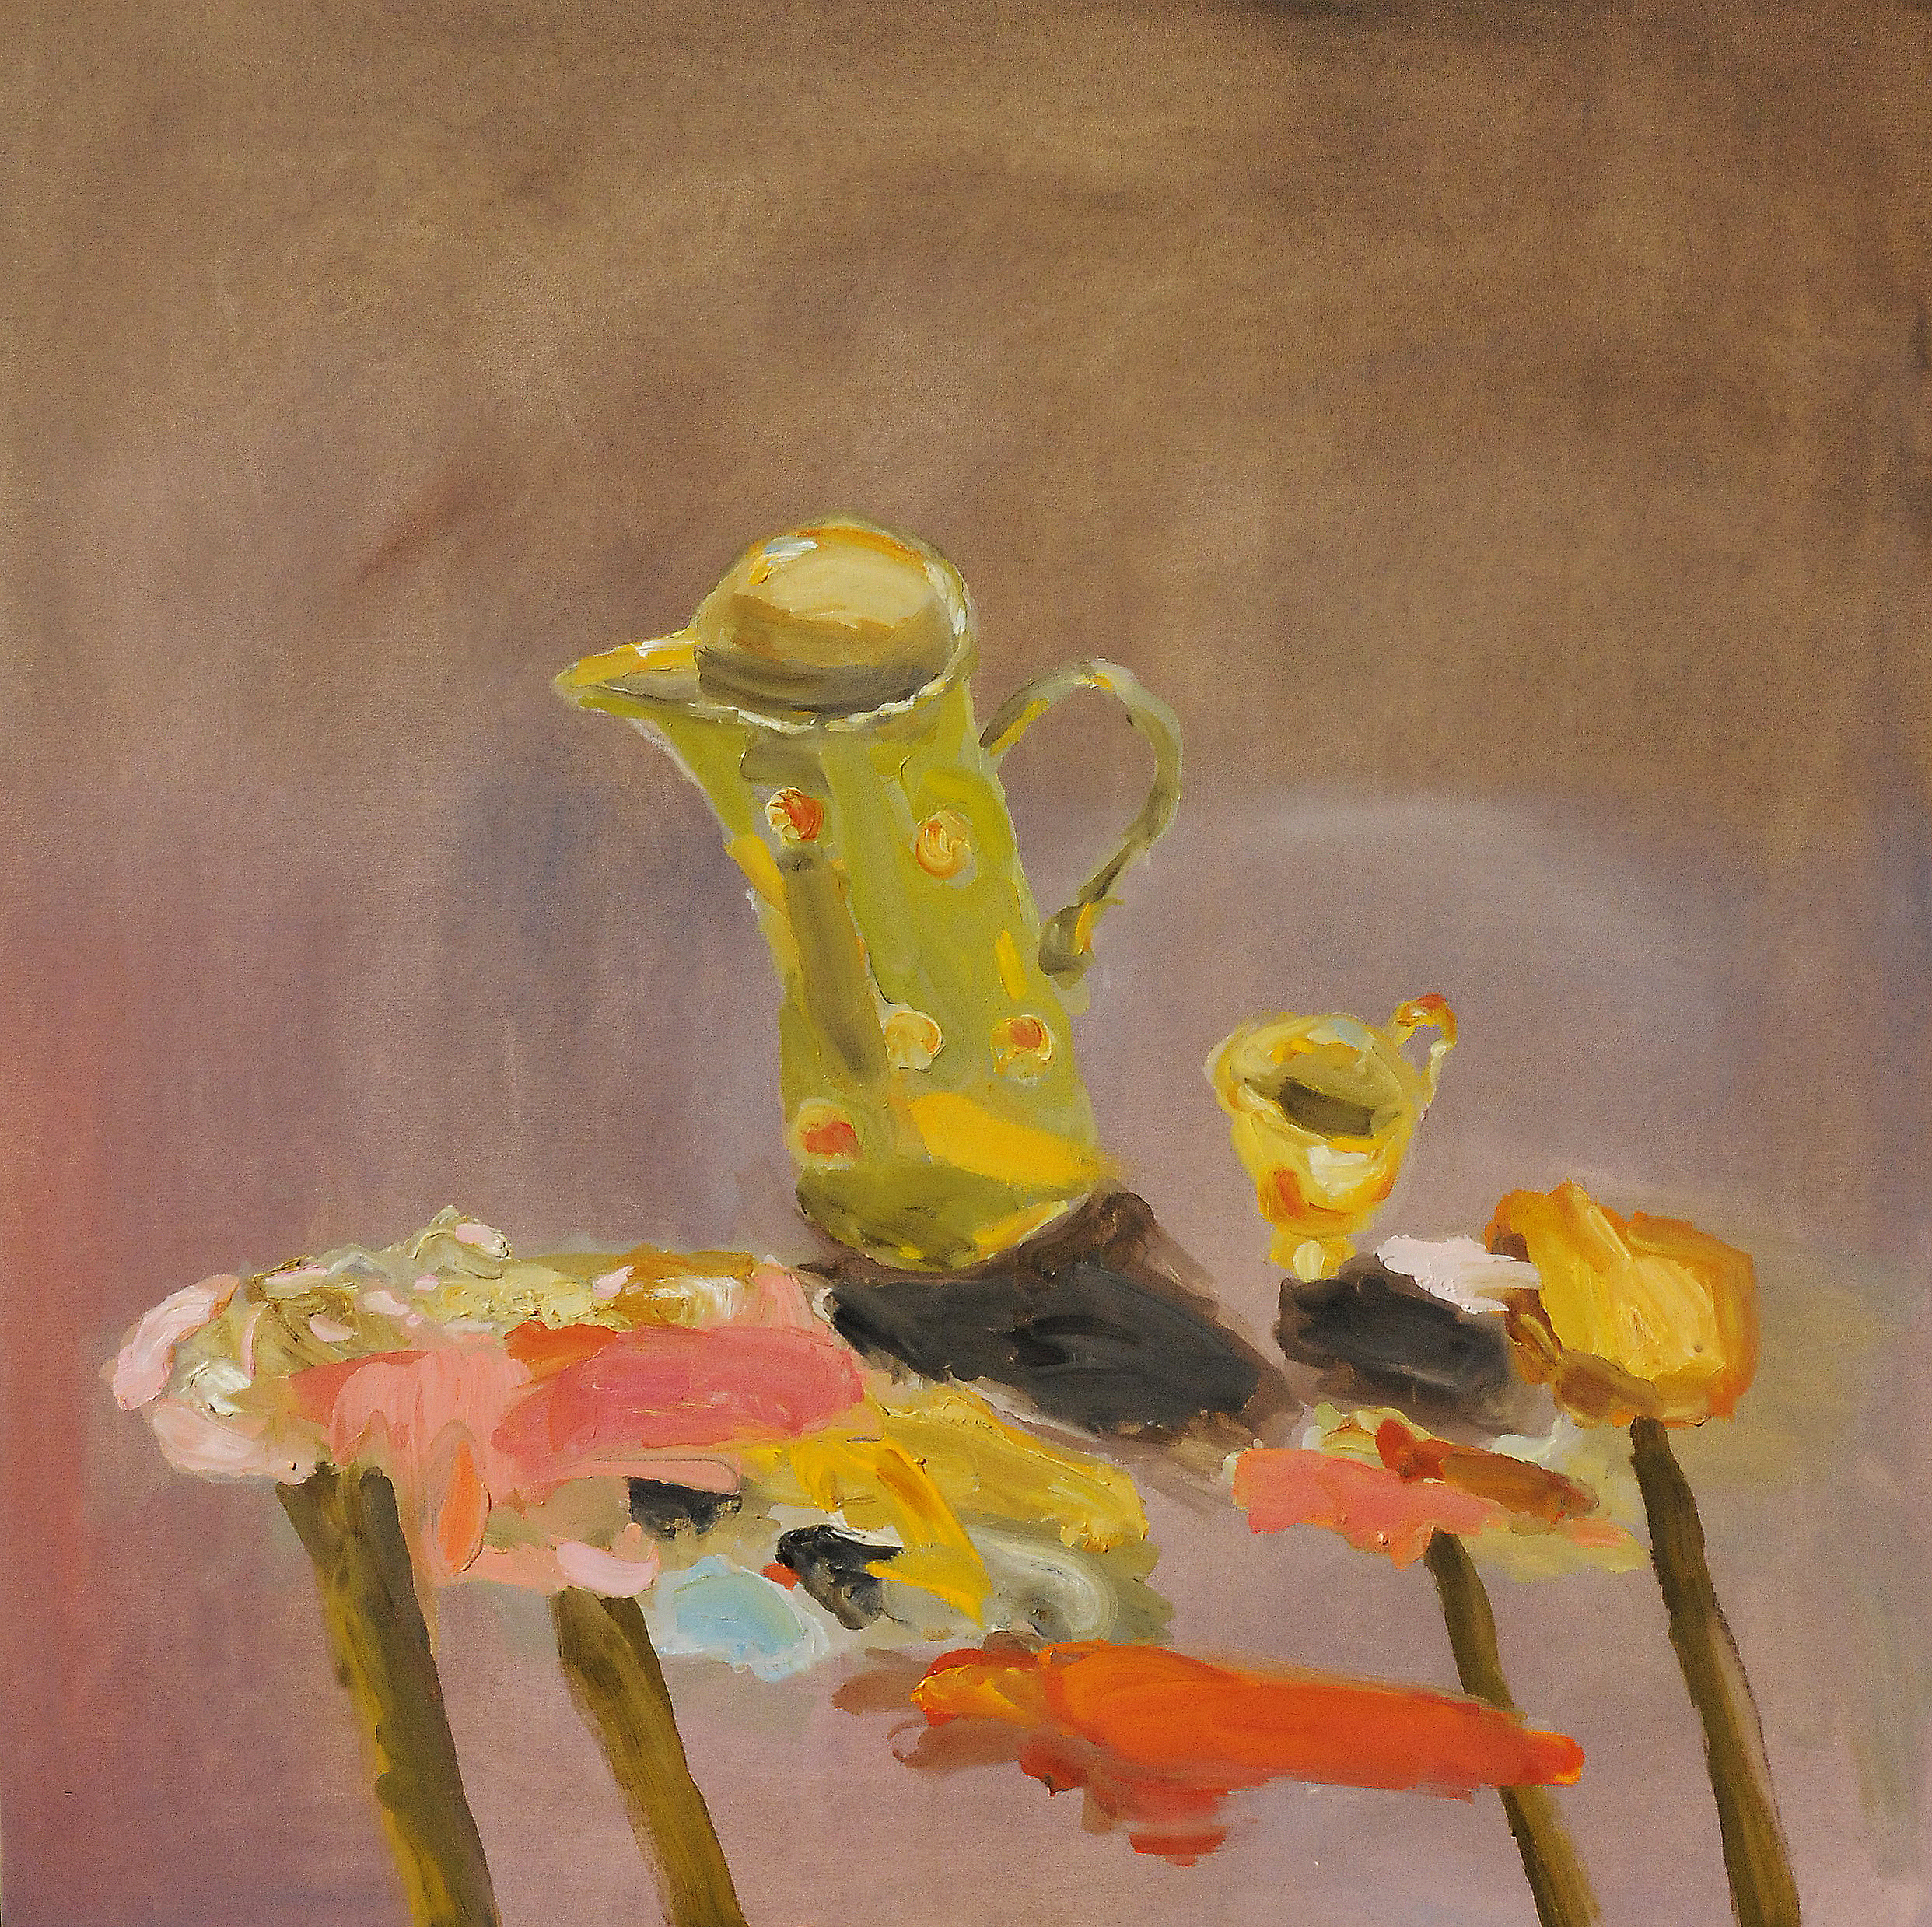 Genevieve Carroll 'Balancing act on earth's table oil on canvas 102 x 102cm $4,800